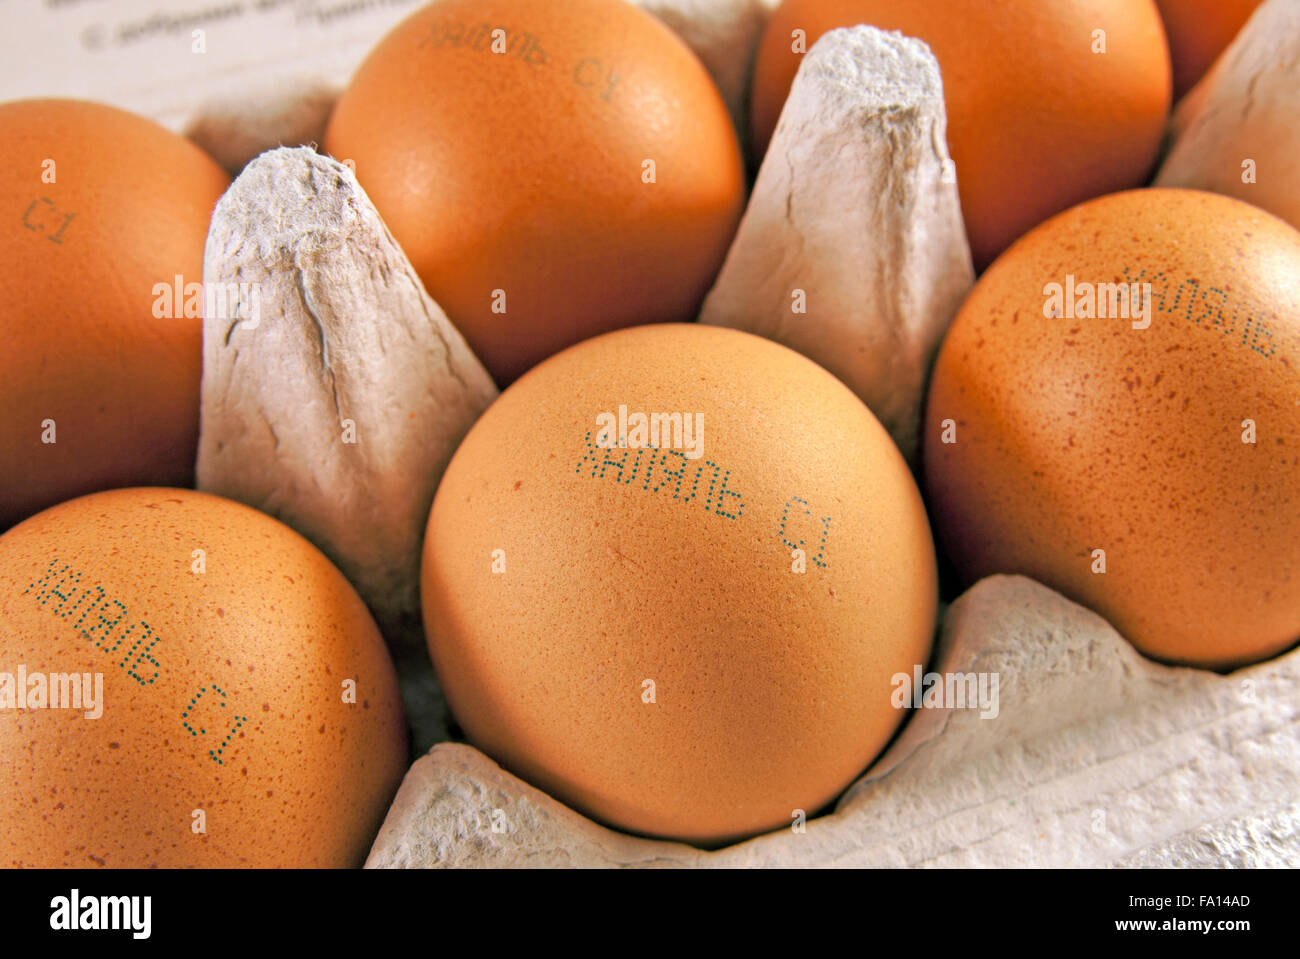 Fresh eggs with marking 'halal' in russian. Food produced according to Muslim laws Stock Photo